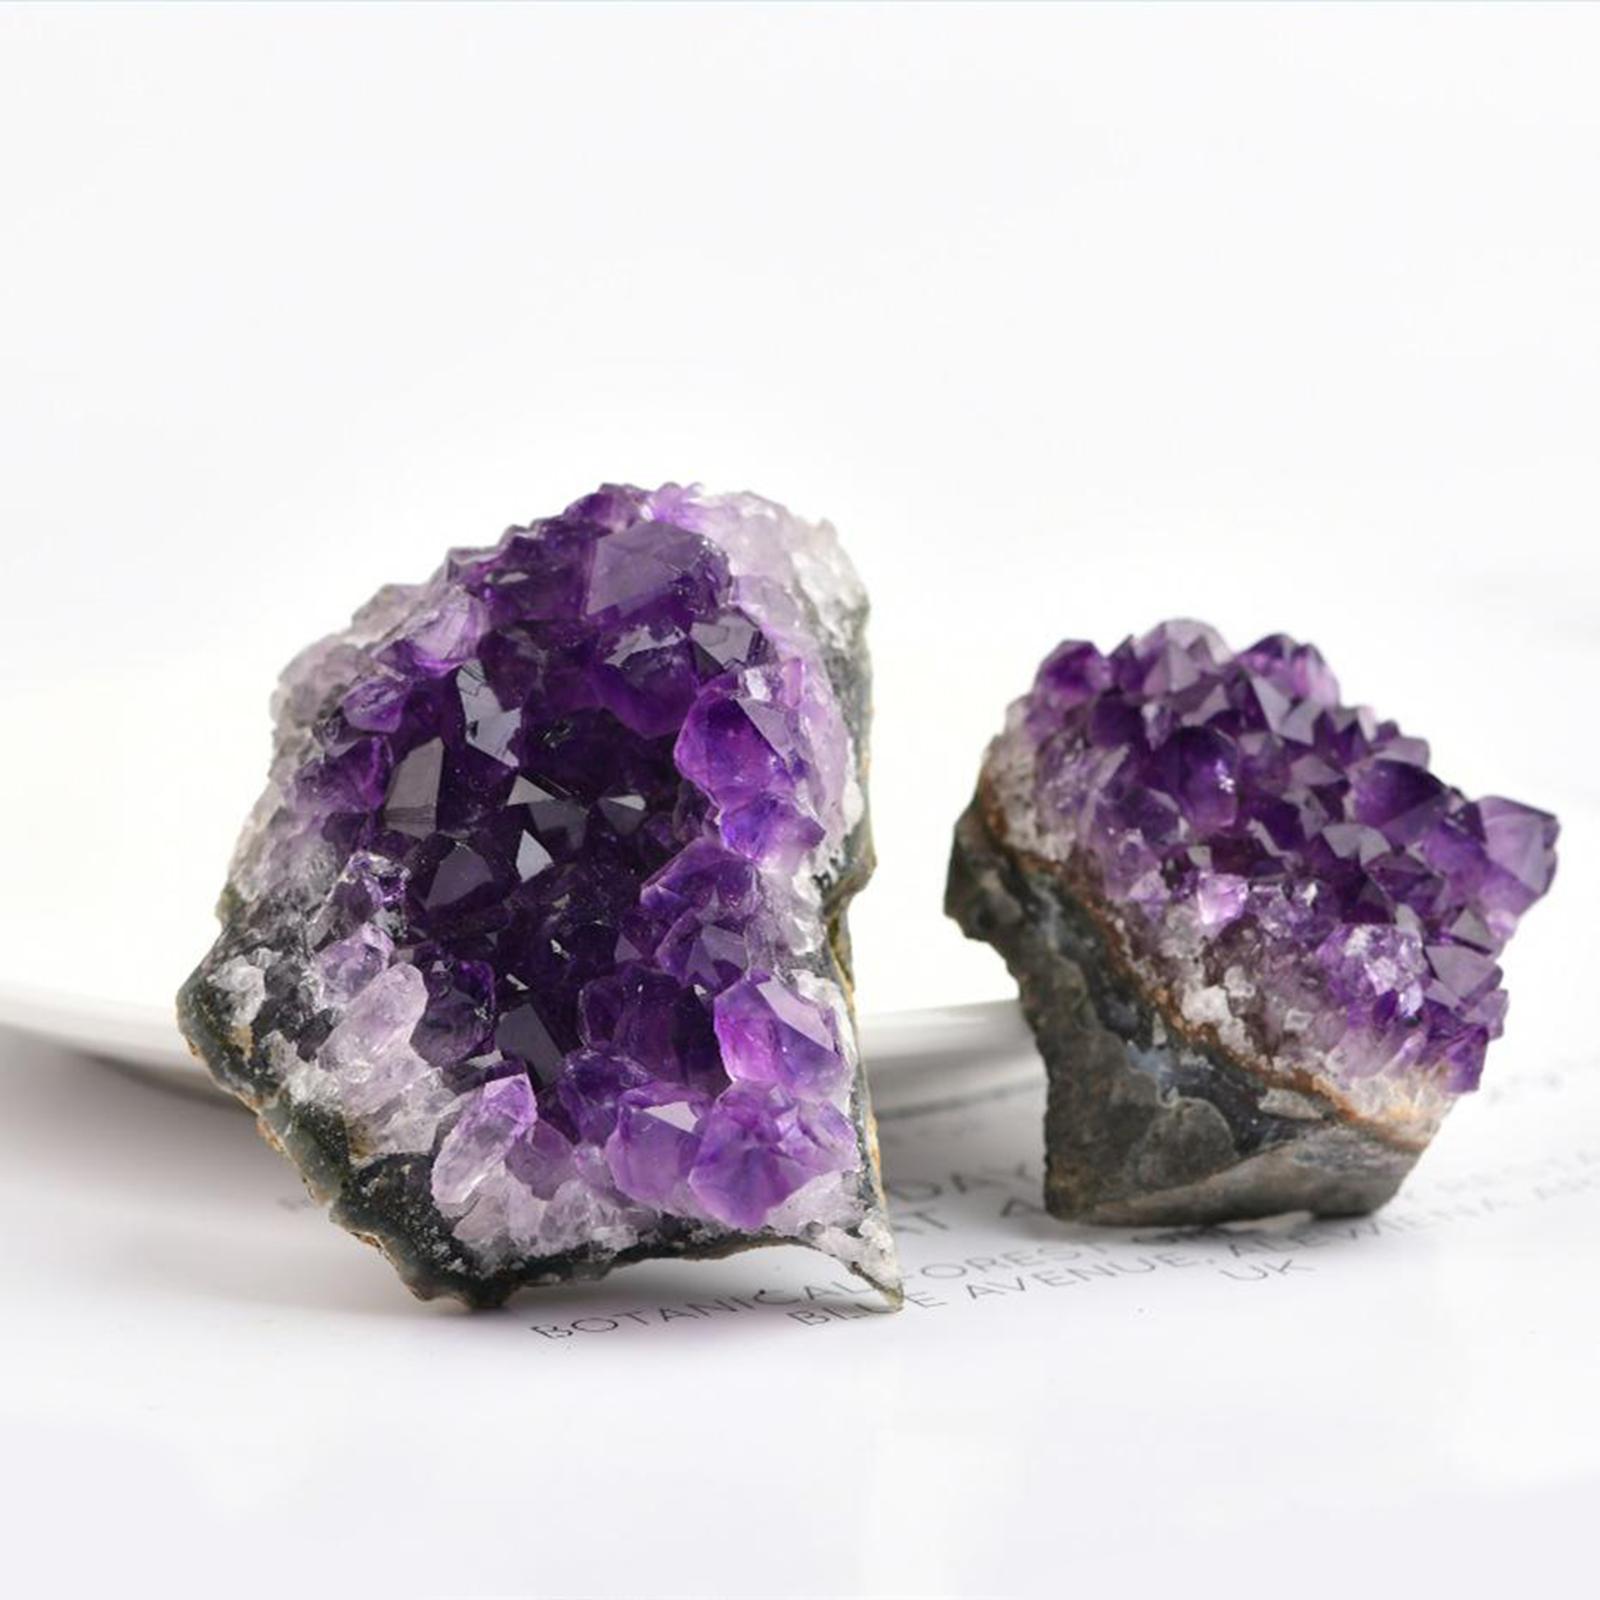 2x Natural Druse Amethysts Crystals Amethyst Crystal Cluster Natural Piece Decorative Stones